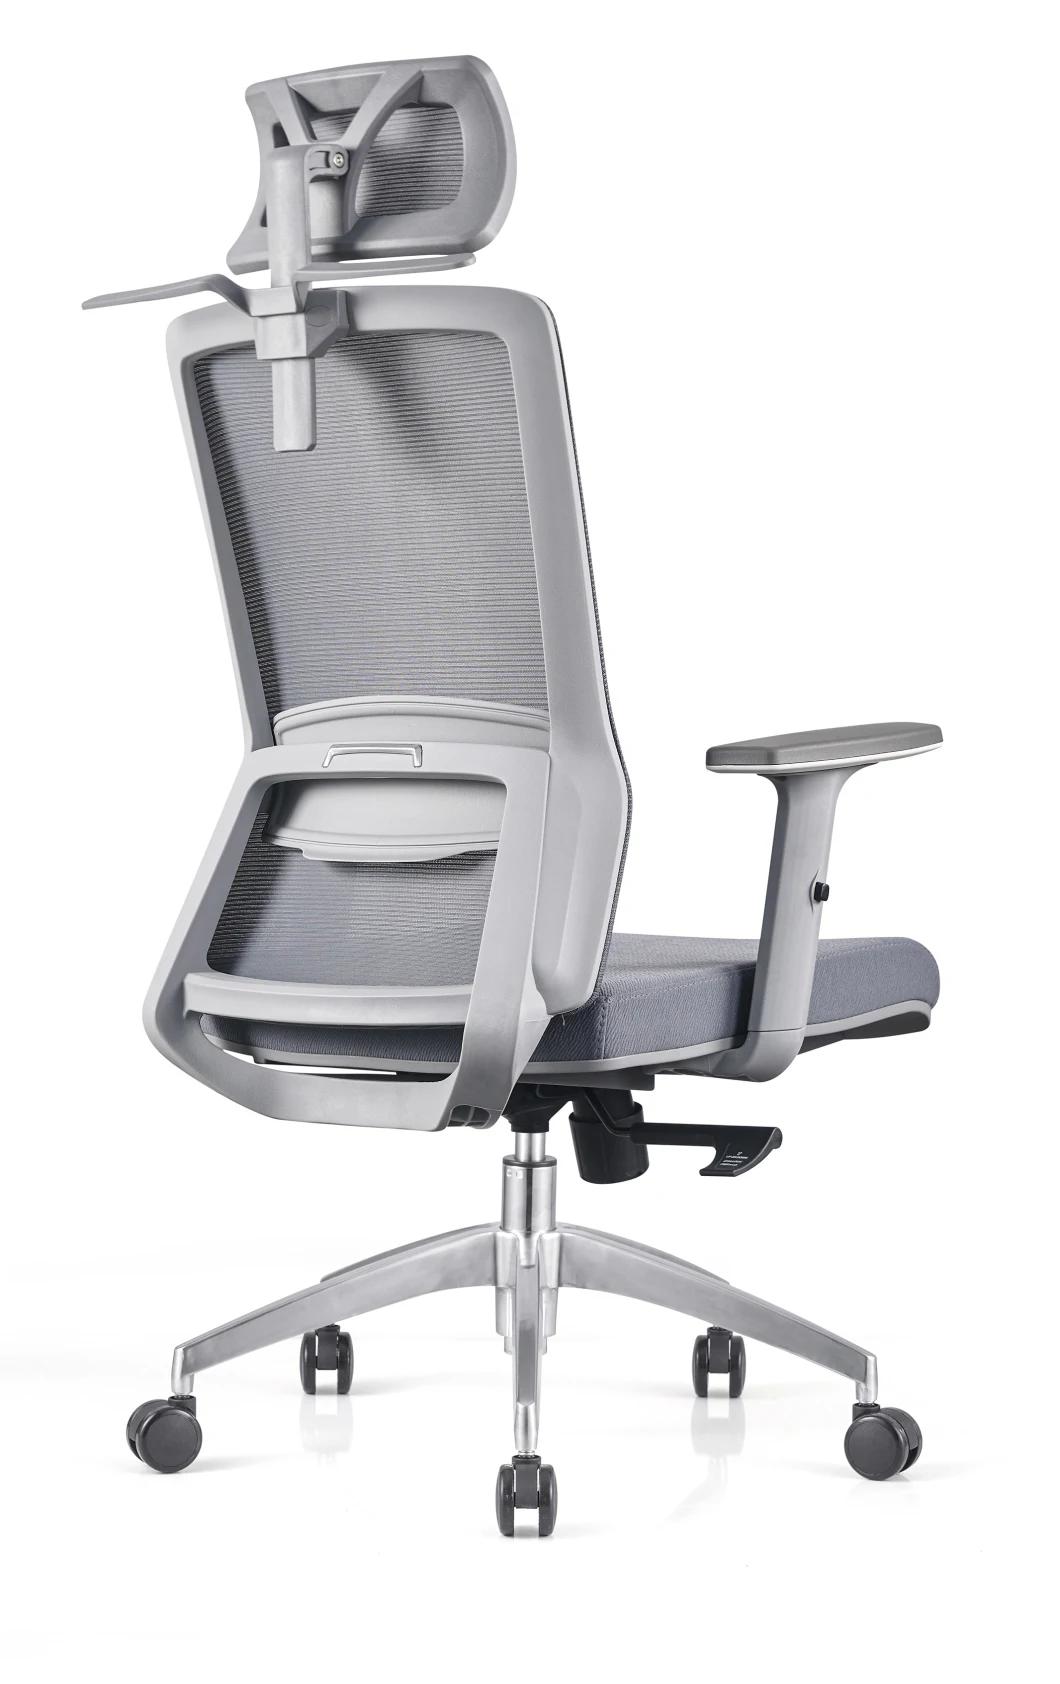 Exquisite Gray New Material and Fiber Frame Mesh Chairs with Adjustable Armrest Office Chairs 